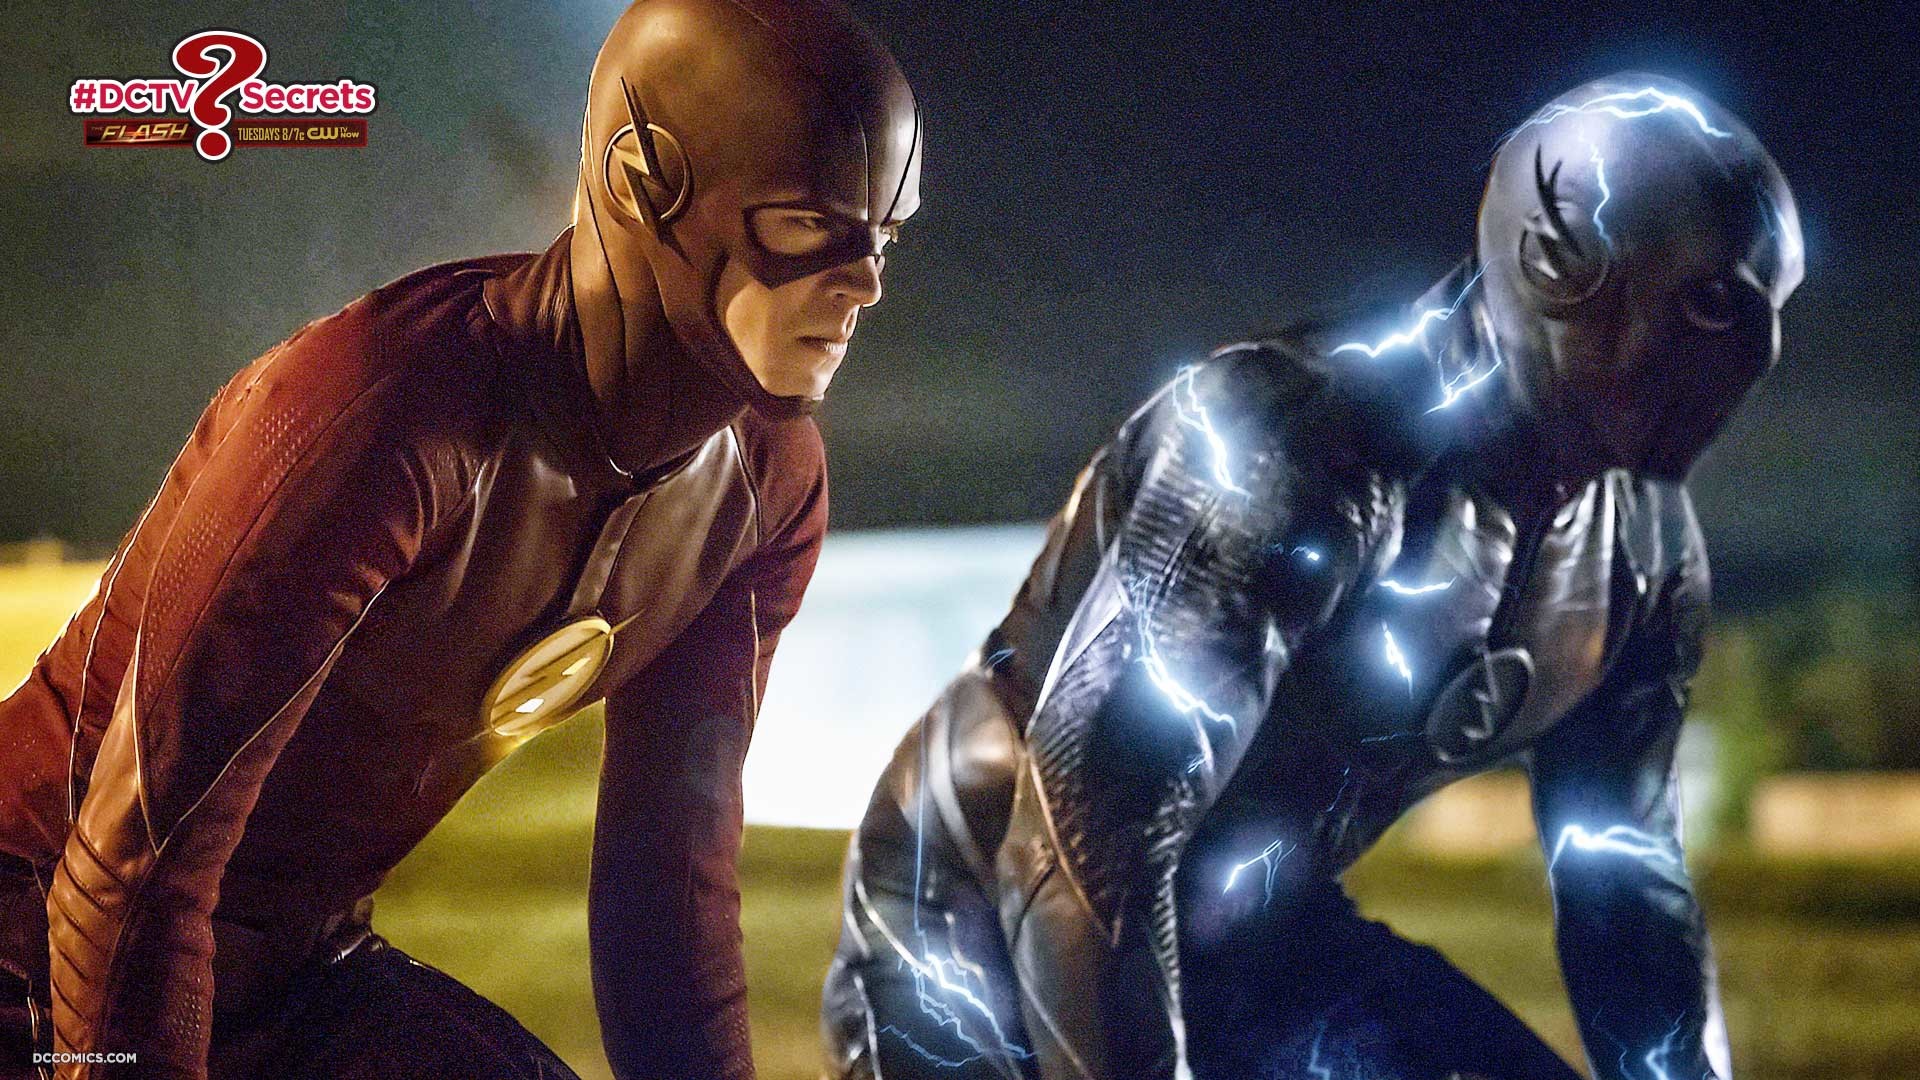 The Flash HD Images 4 #TheFlashHDImages #TheFlash #tvseries #wallpapers